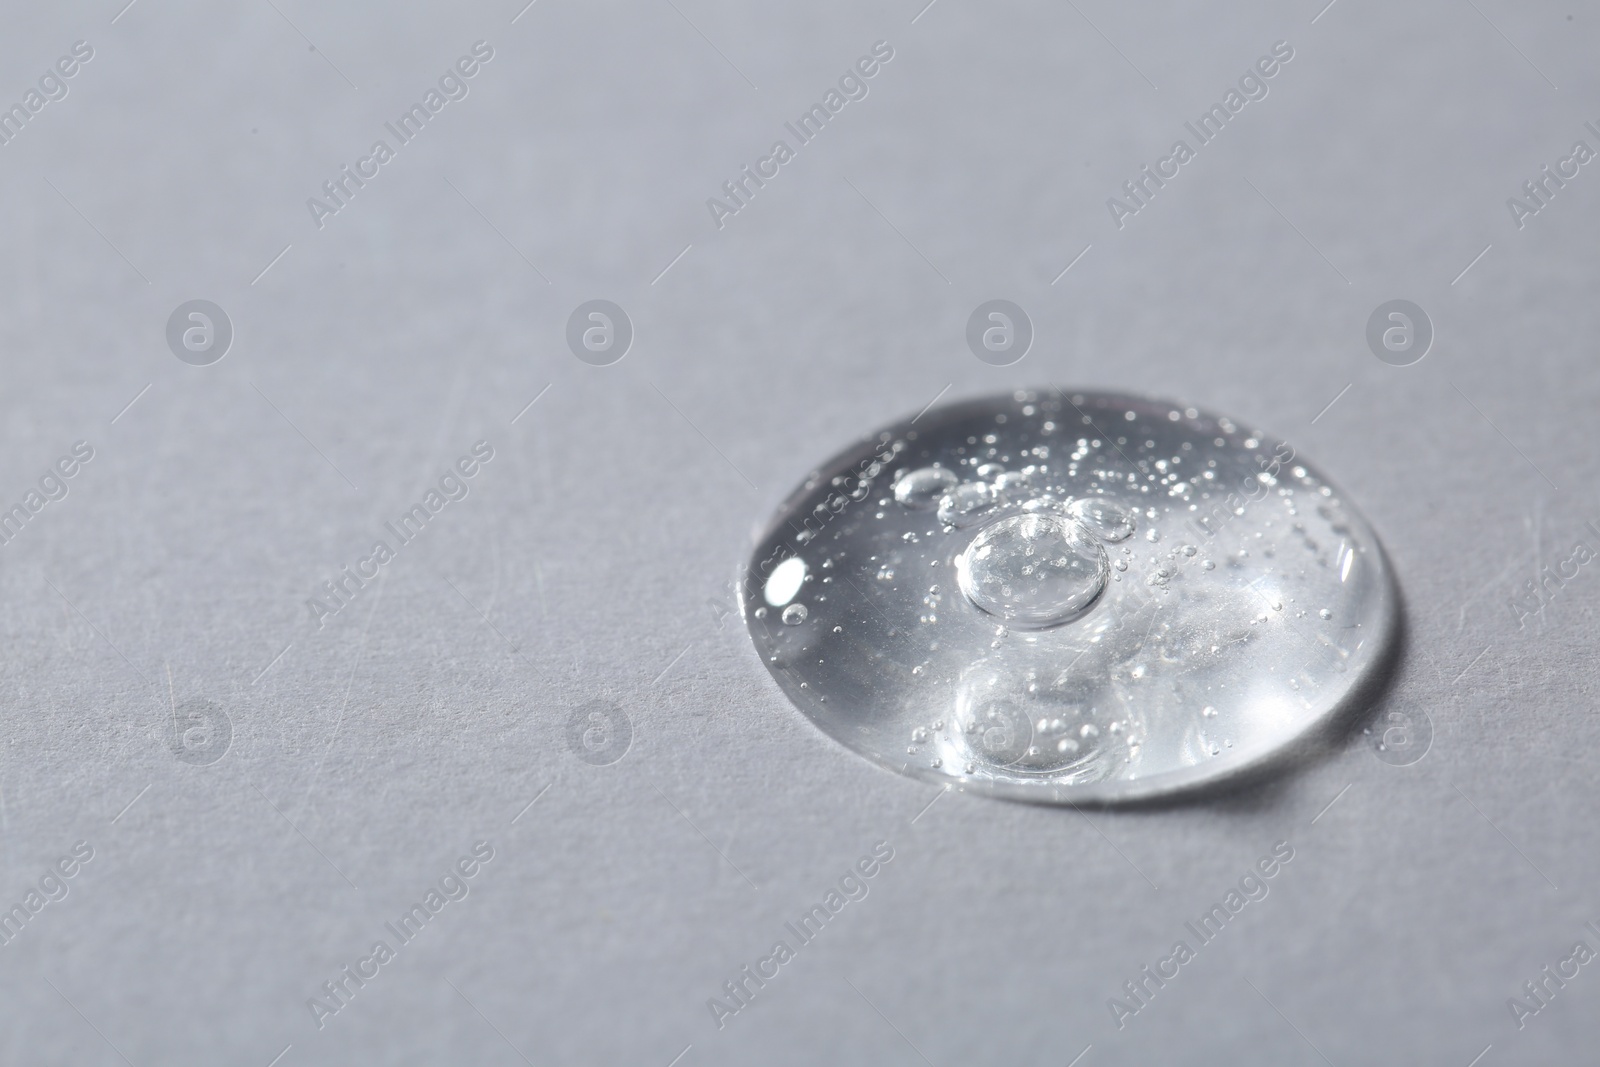 Photo of Drop of cosmetic serum on light background, macro view. Space for text